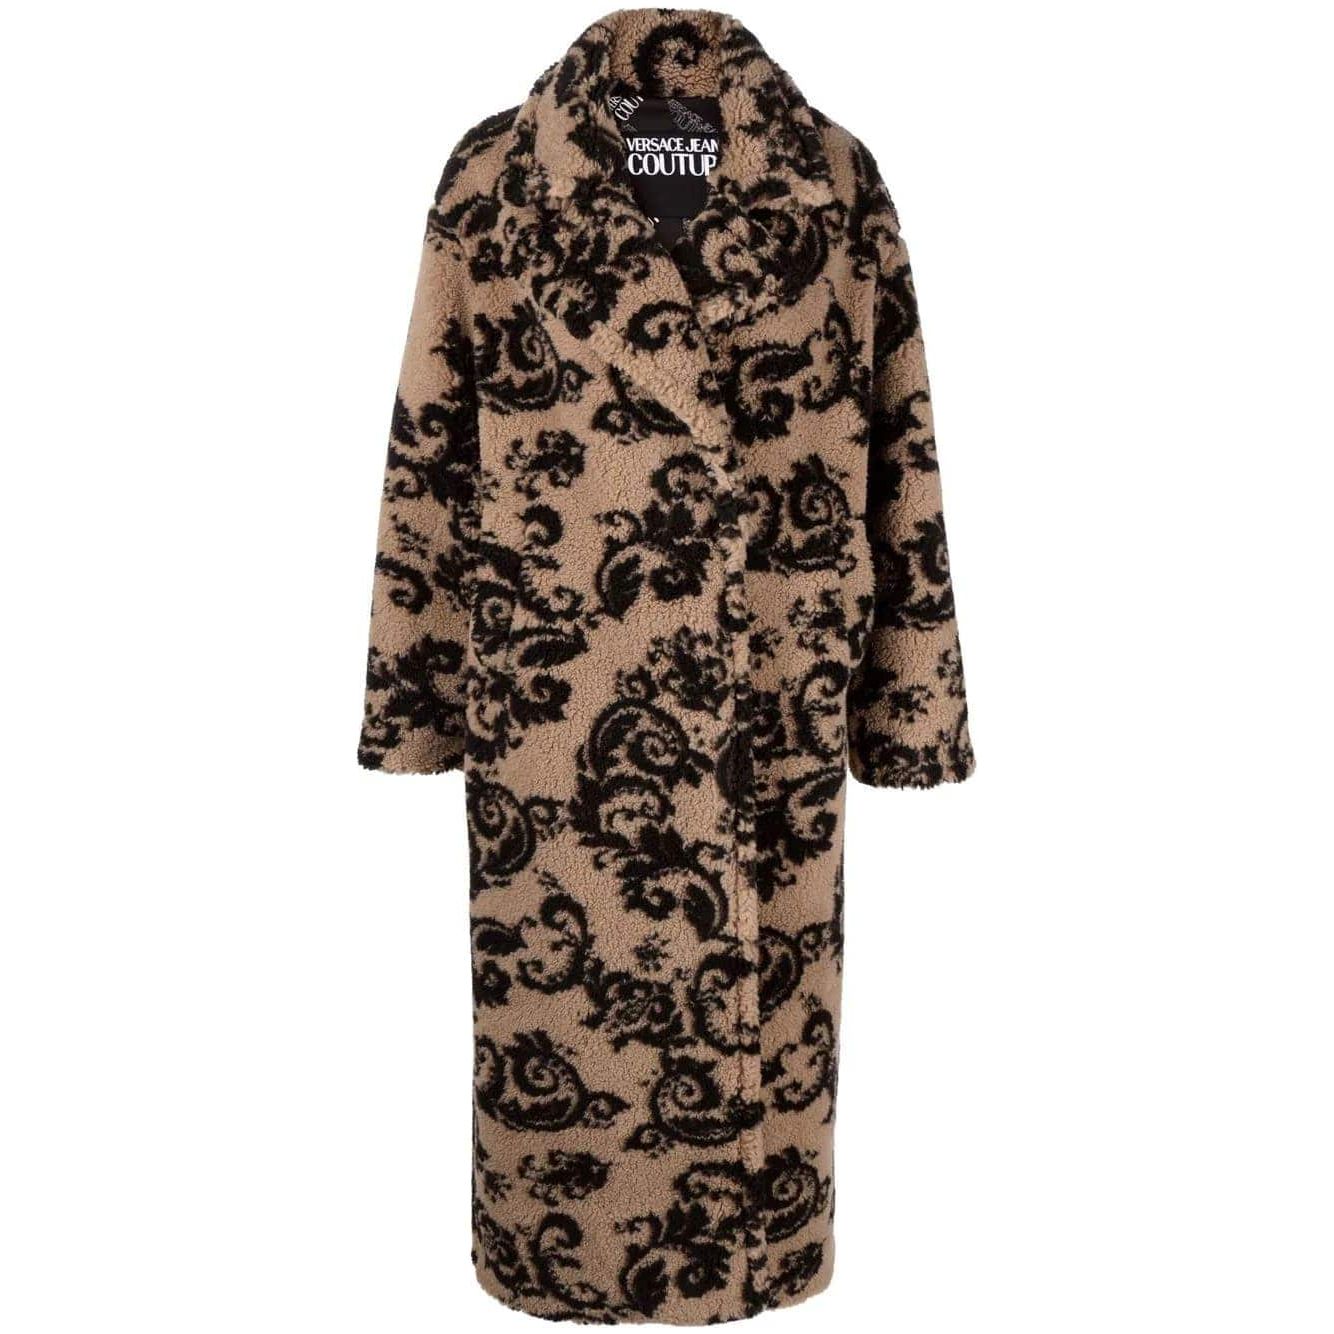 VERSACE JEANS COUTURE COAT - Yooto